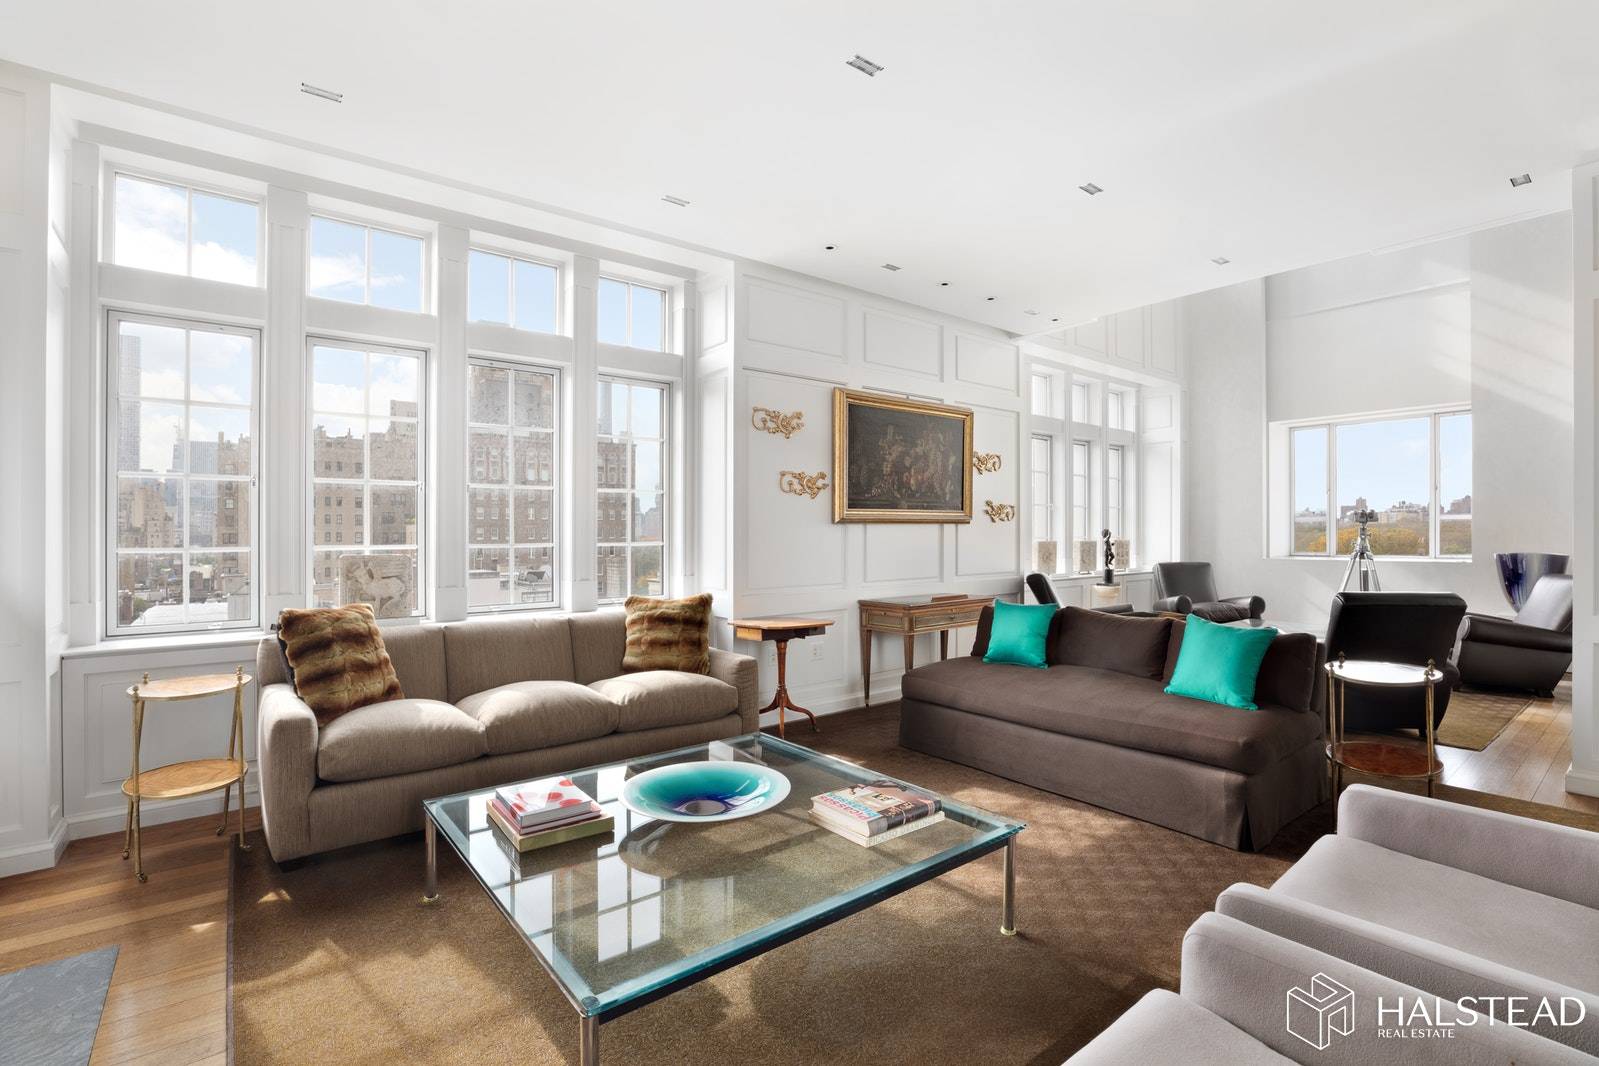 Residence 10 11 at 9 East 79th Street spans the tenth and eleventh floors at one of the city's most exclusive addresses.